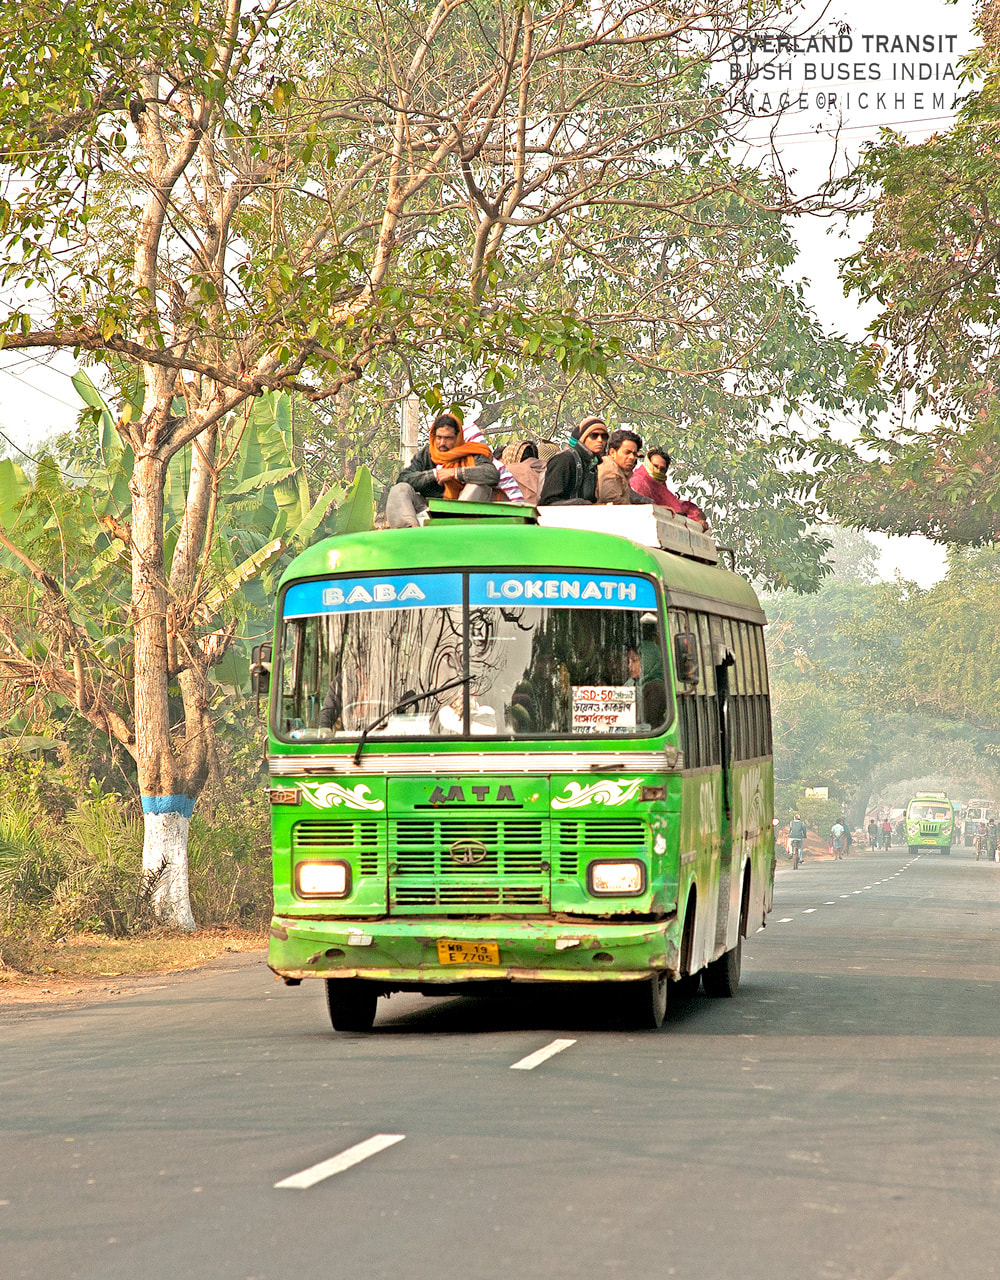 solo overland travel and transit India, bush bus roof top transit image by Rick Hemi